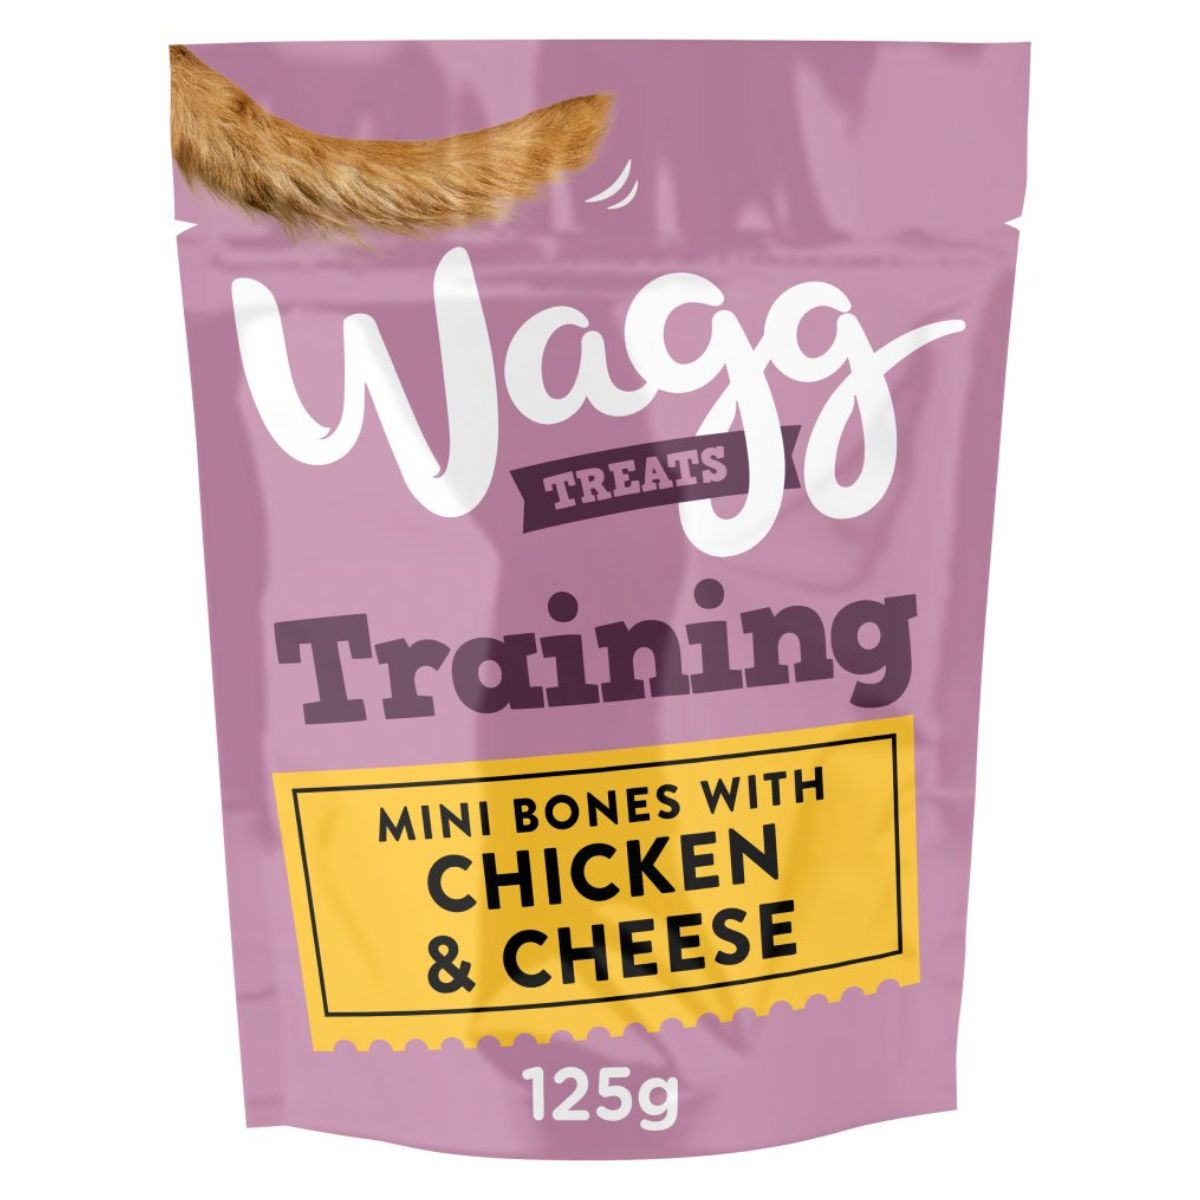 A purple packet of Wagg - Training Treats Chicken & Cheese - 125g. Perfect for dog training, there is an image of a brown tail on the top left corner of the packet.